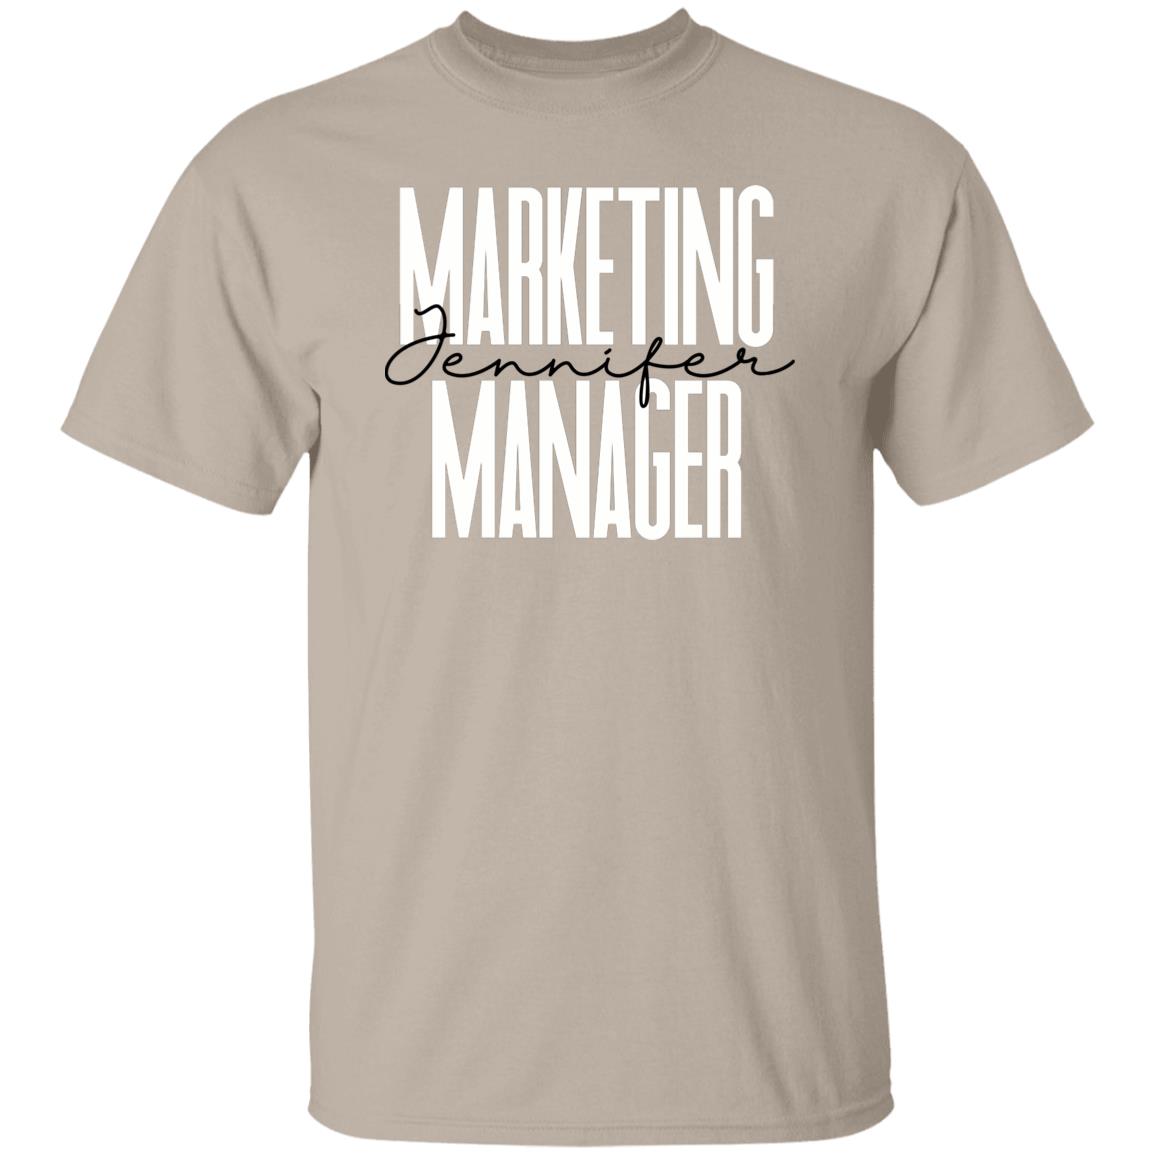 Personalized T-Shirt gift Marketing Manager Custom name Social Media Marketer Unisex Tee Sand Pink Blue-Family-Gift-Planet